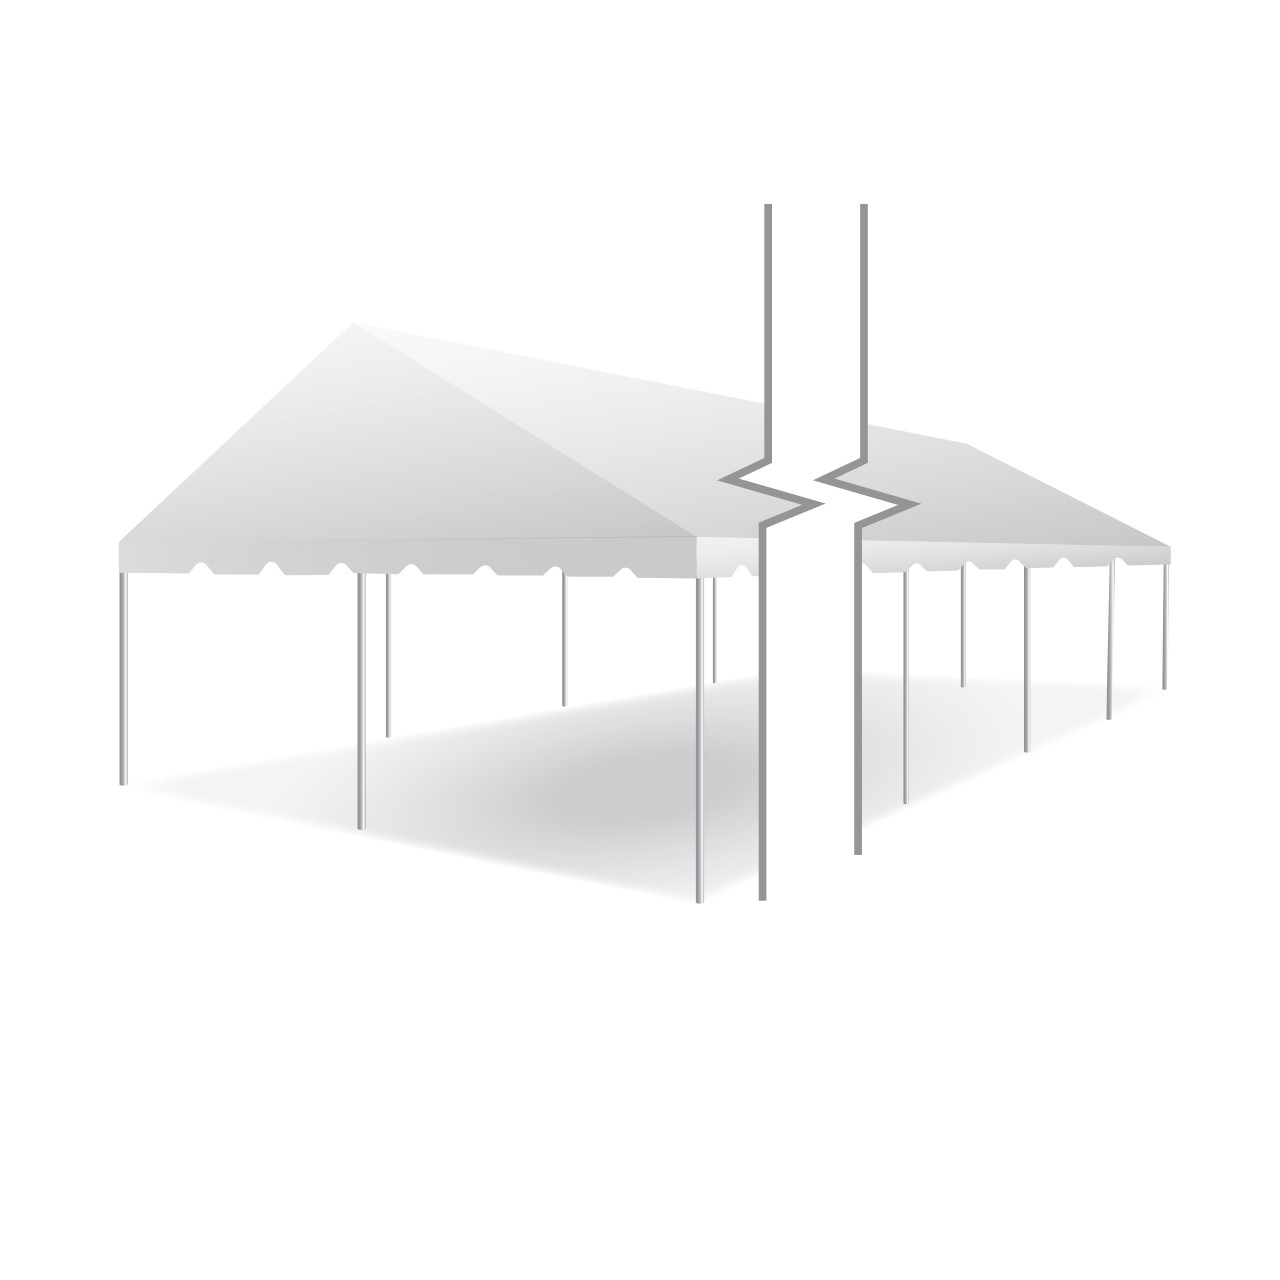 20' x 50' Classic Series Gable End Frame Tent, 1 Piece Tent Top, Complete